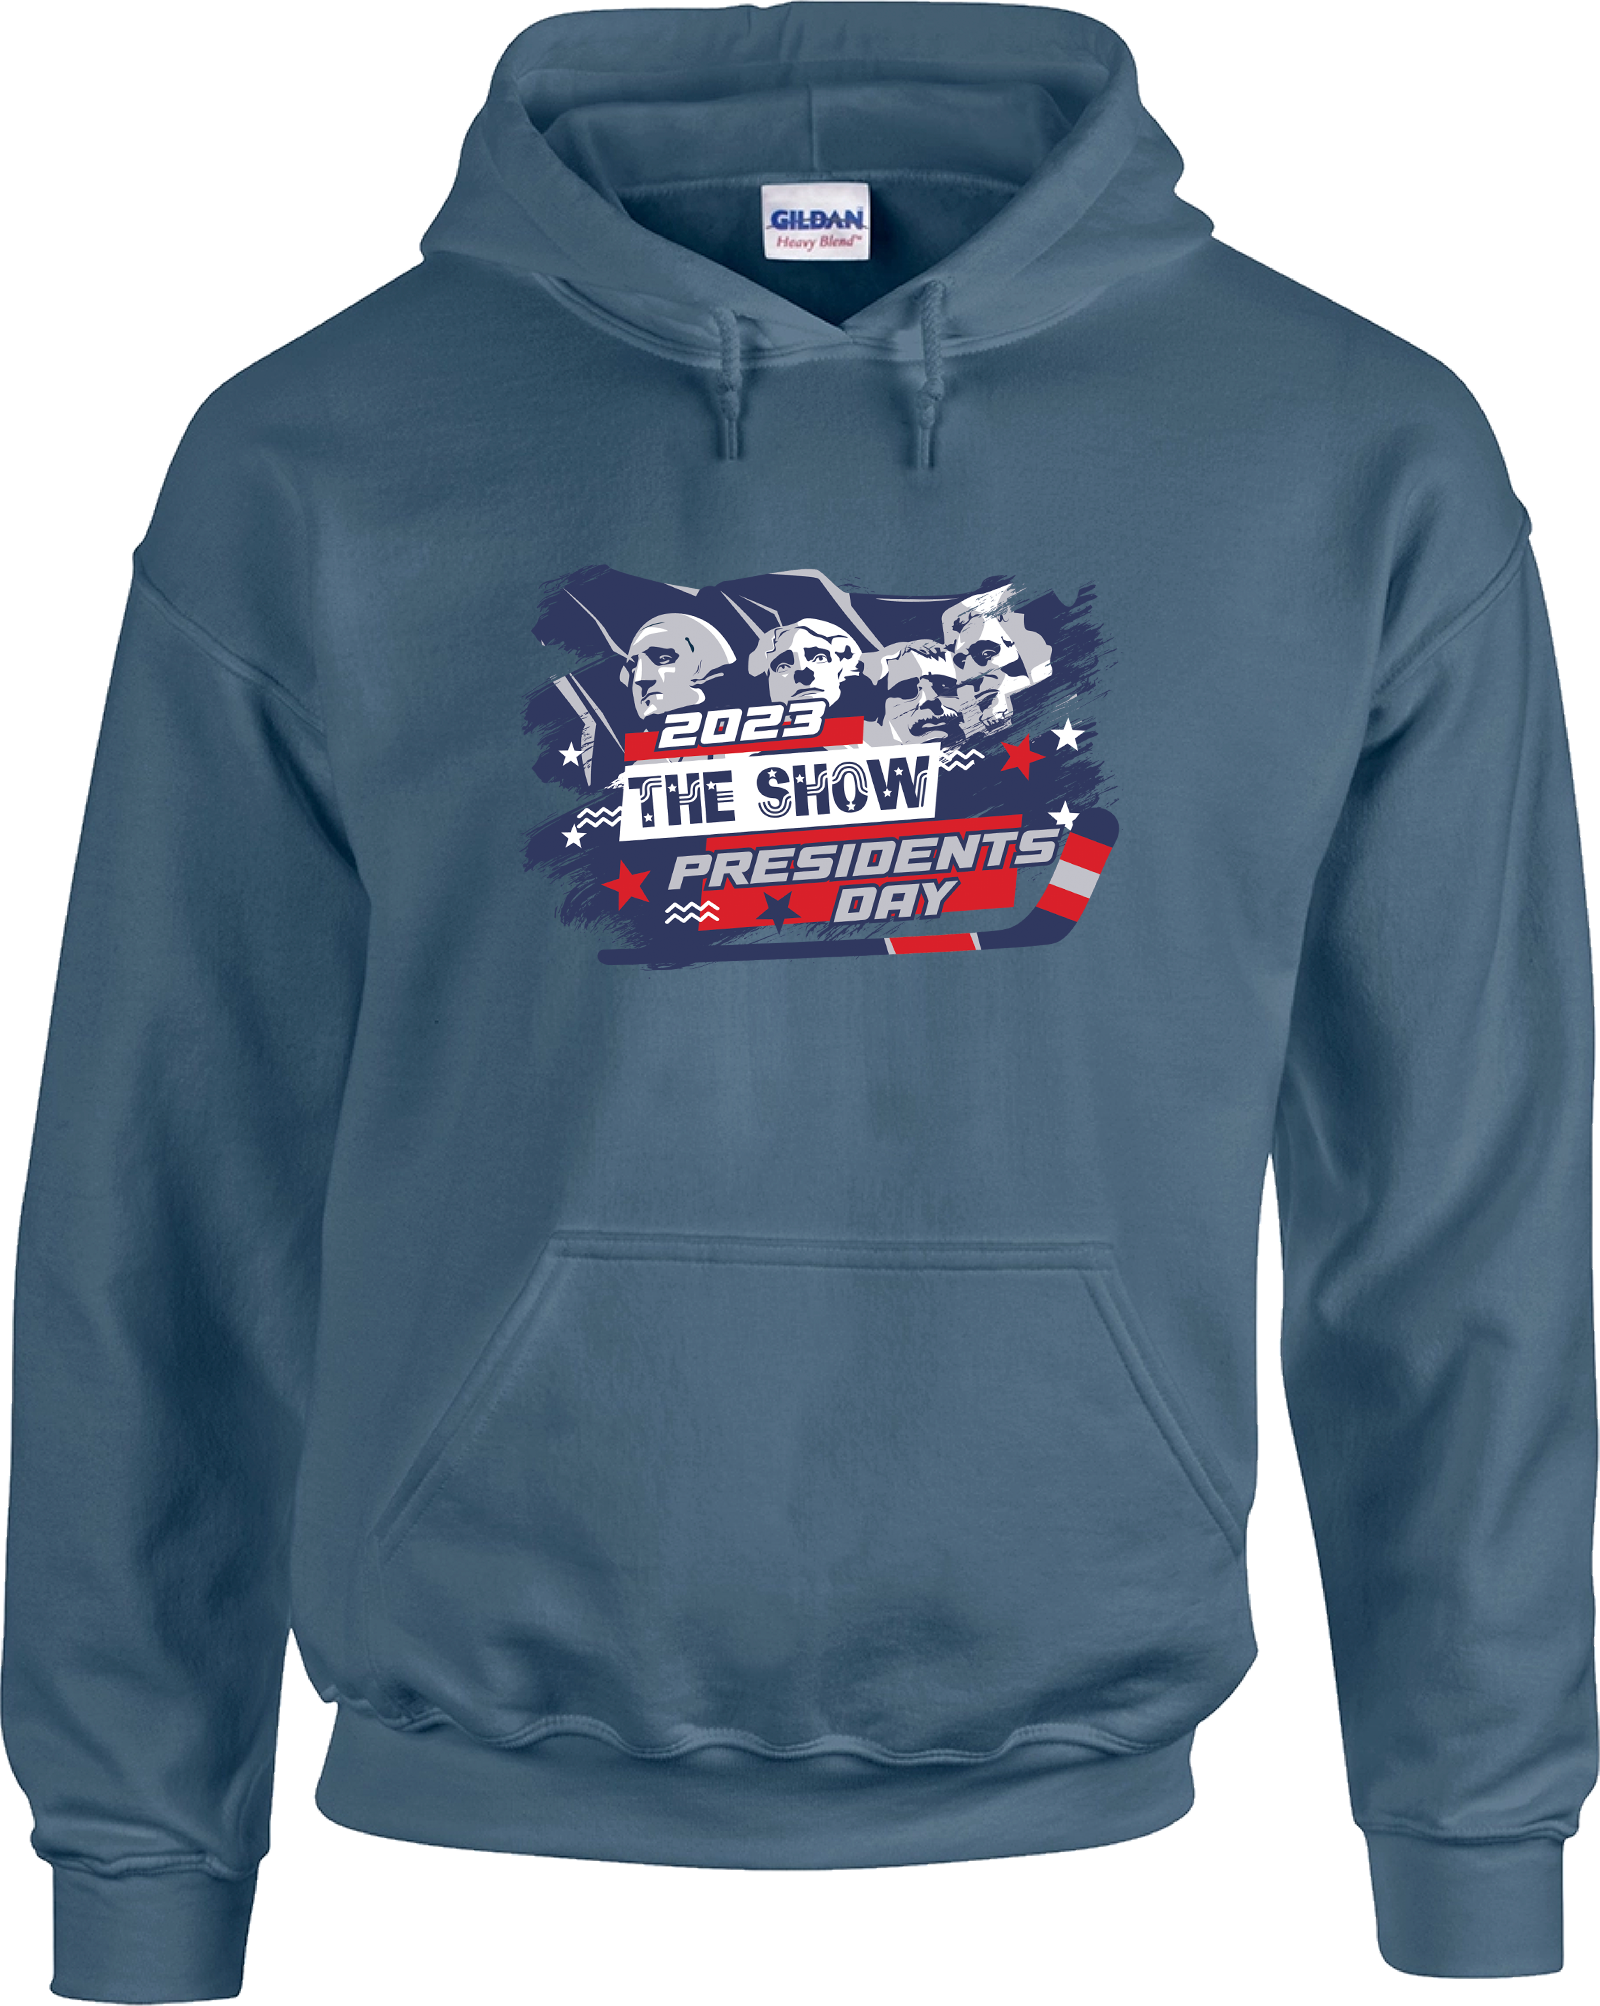 HOODIES - 2023 The Show President's Day